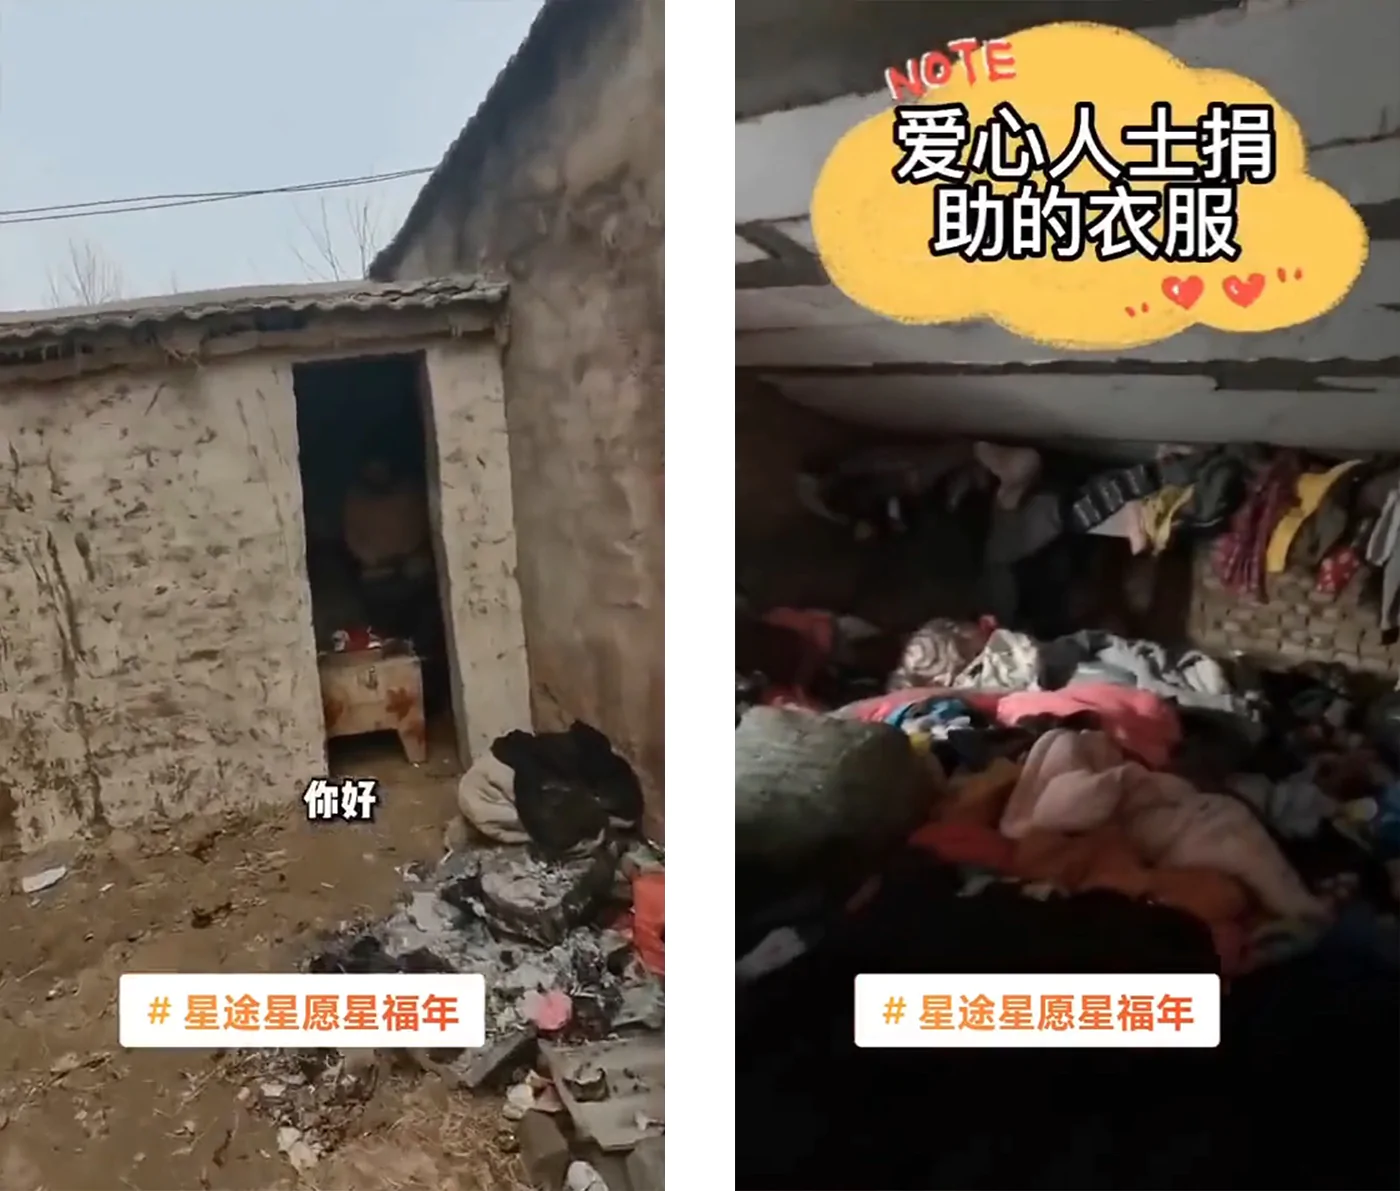 Sex extremes in Xuzhou